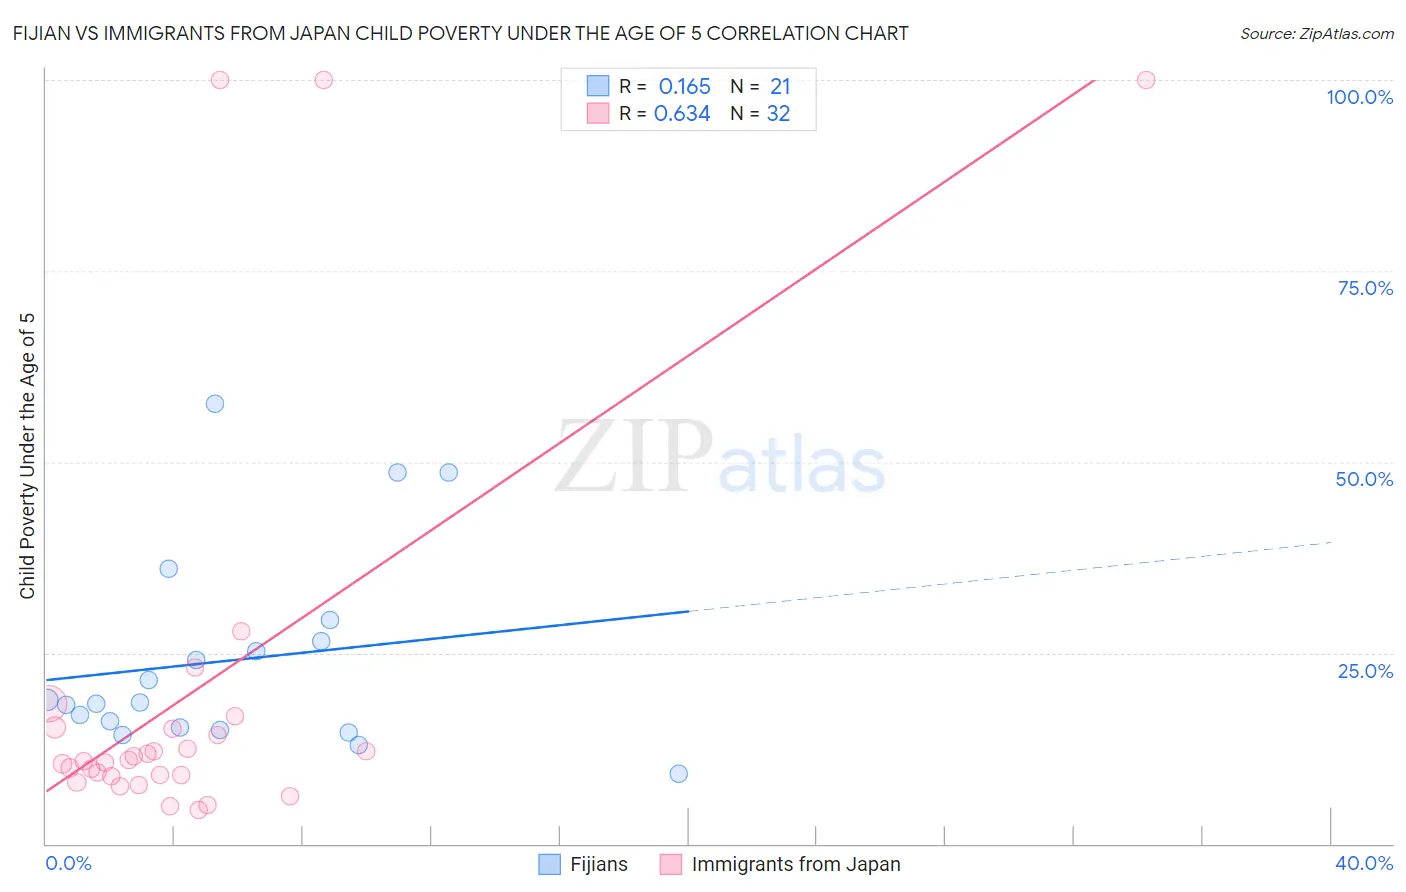 Fijian vs Immigrants from Japan Child Poverty Under the Age of 5